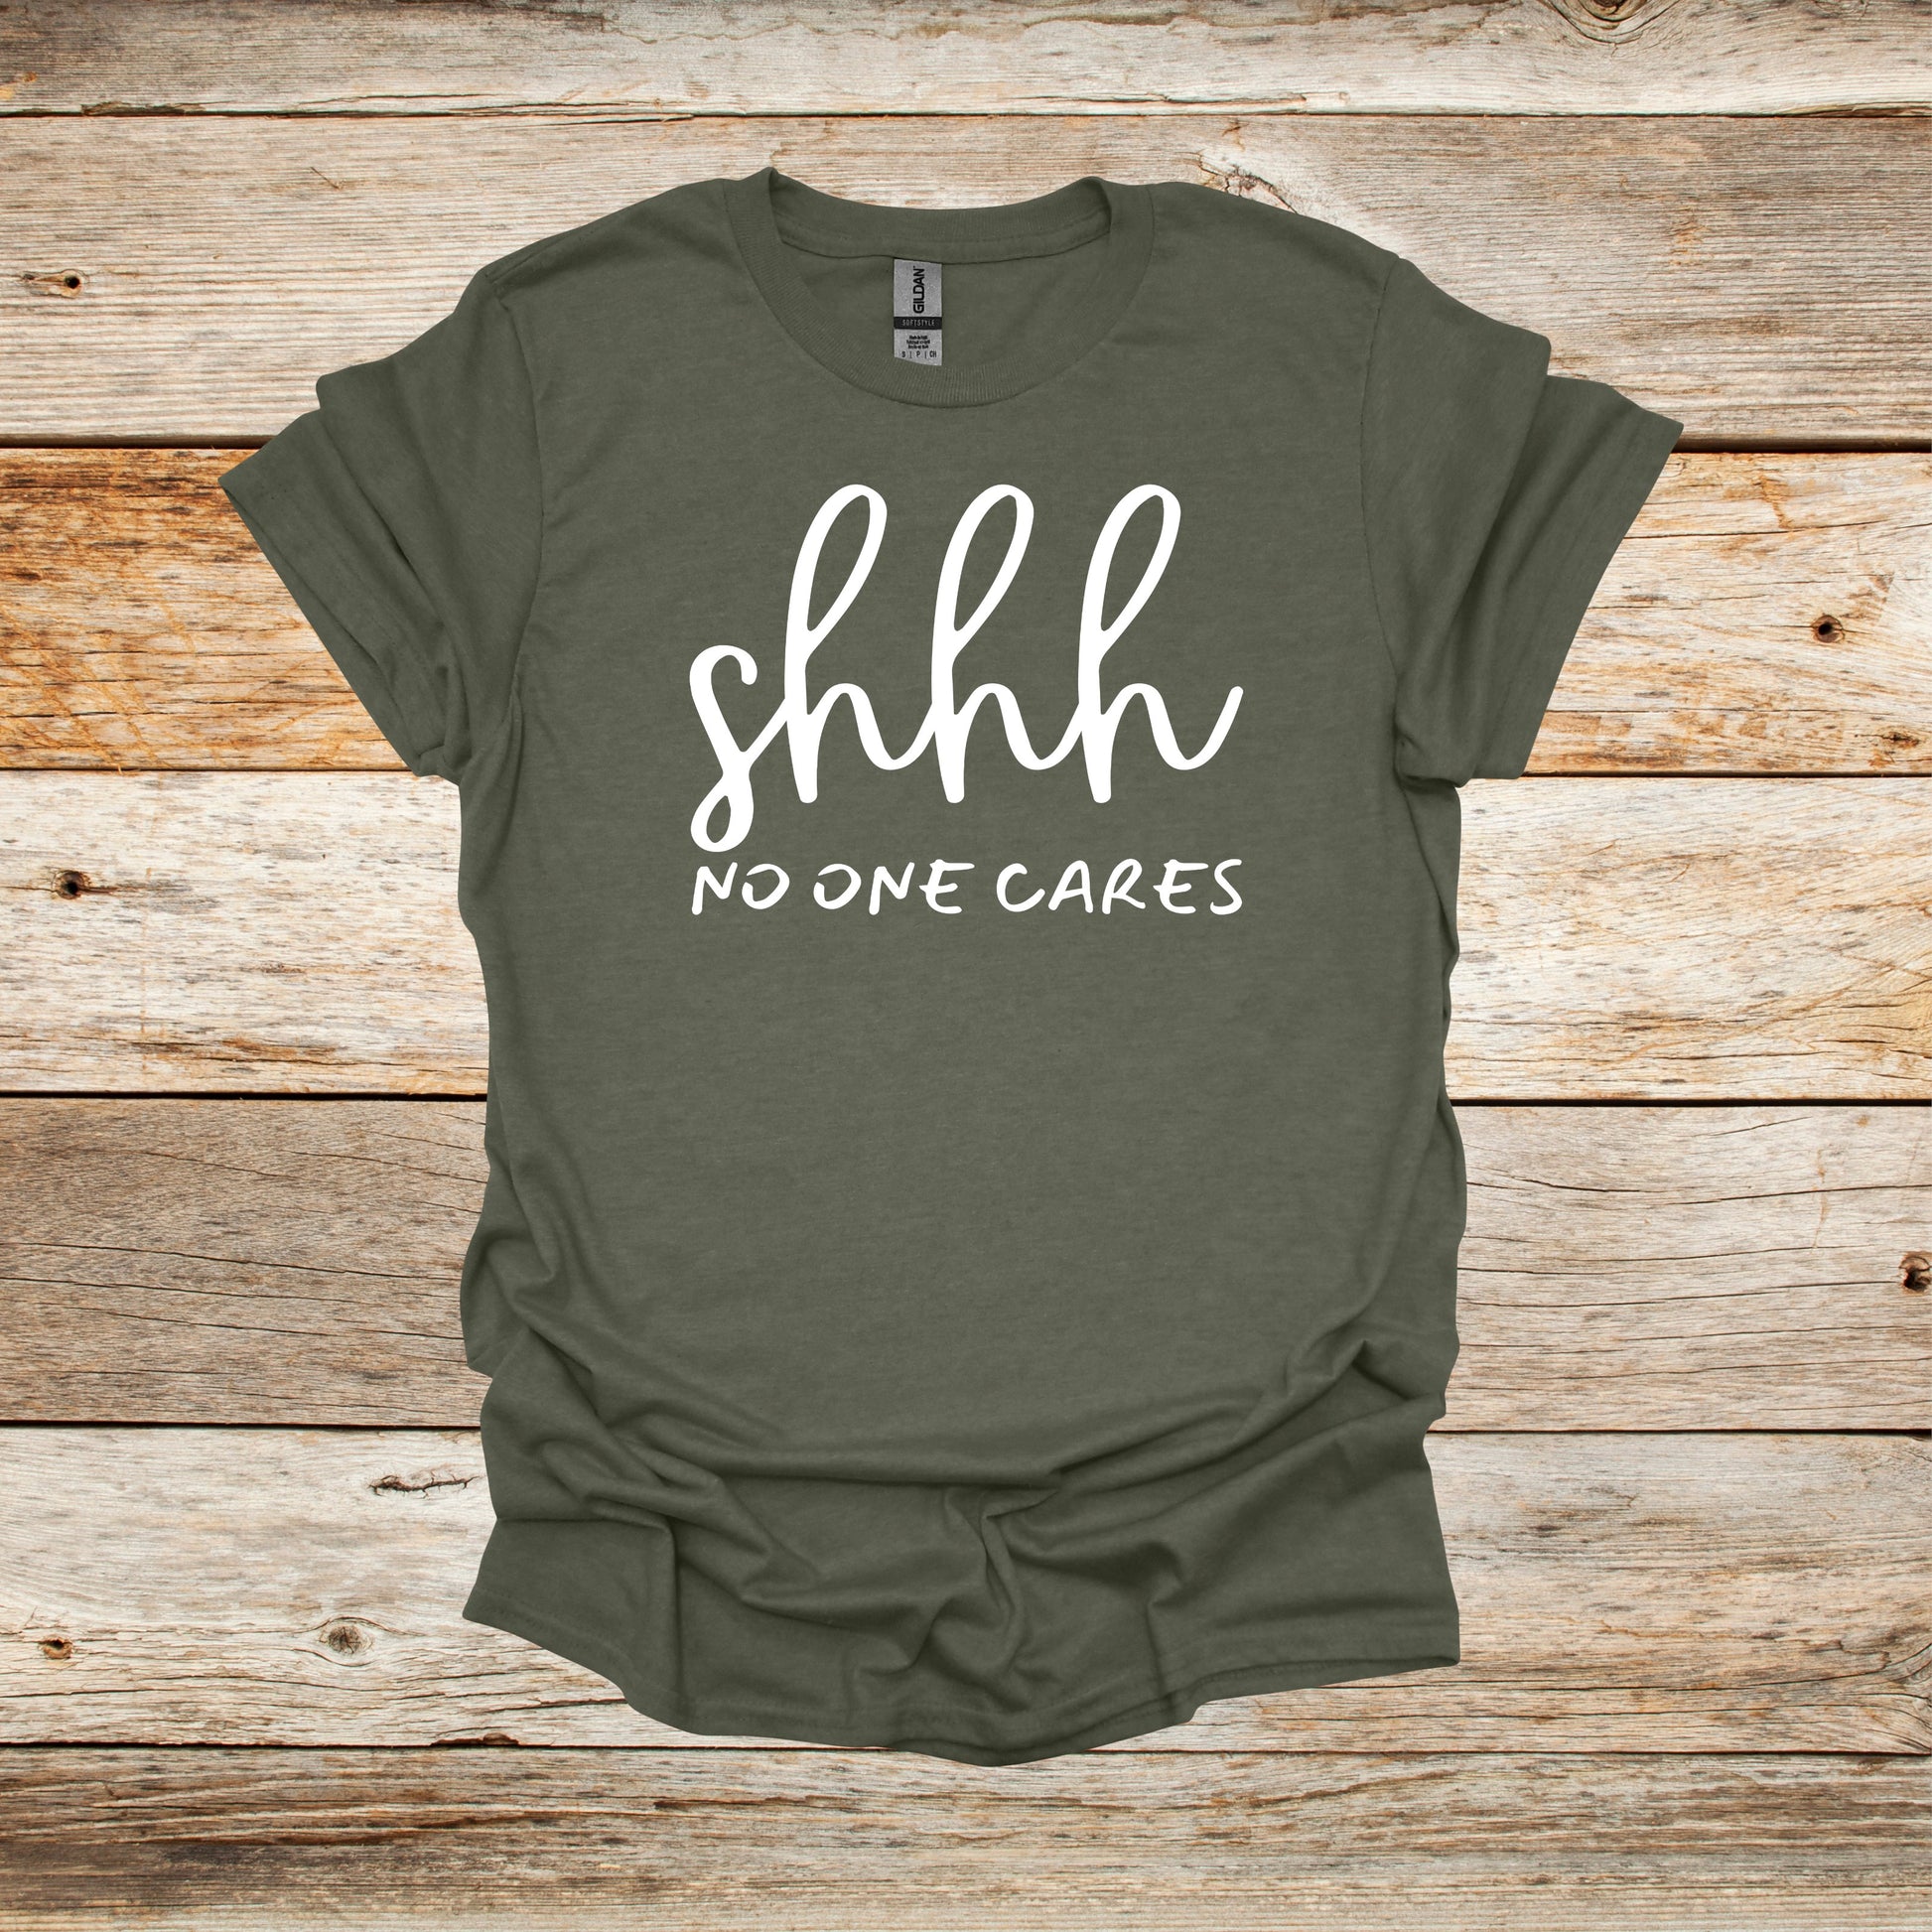 Sayings T-Shirt -Shhh No One Cares - Men's and Women's Tee Shirts - Sayings T-Shirts Graphic Avenue Heather Military Green Adult Small 